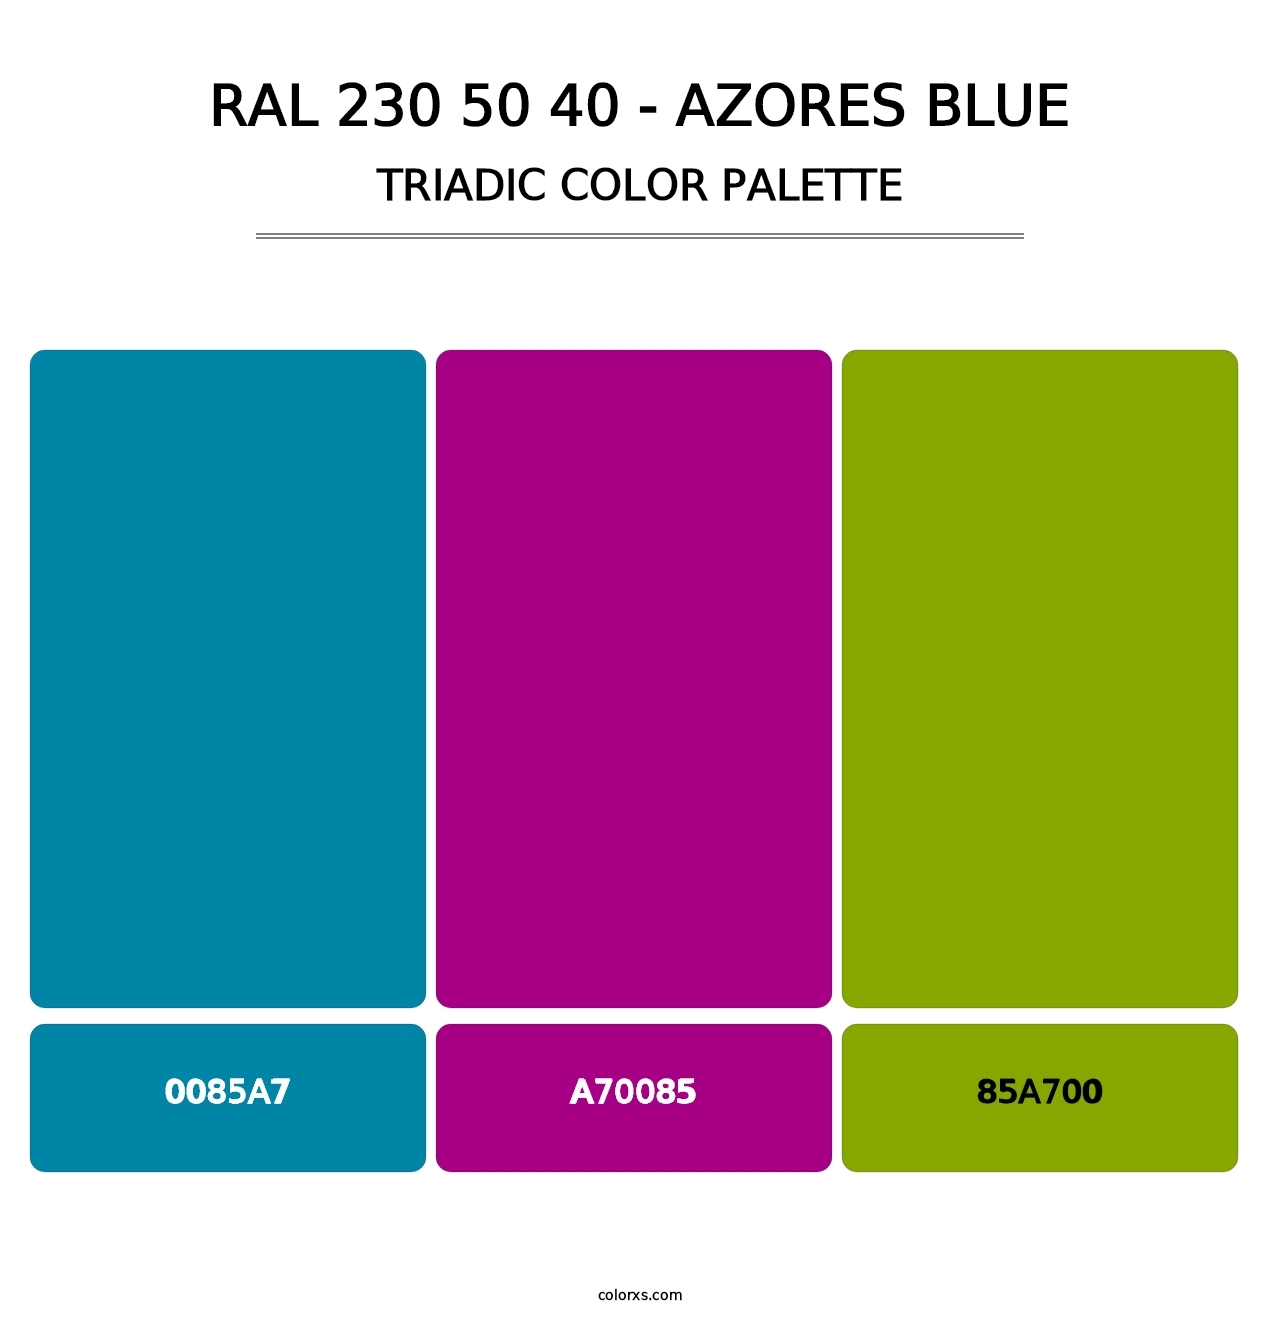 RAL 230 50 40 - Azores Blue - Triadic Color Palette